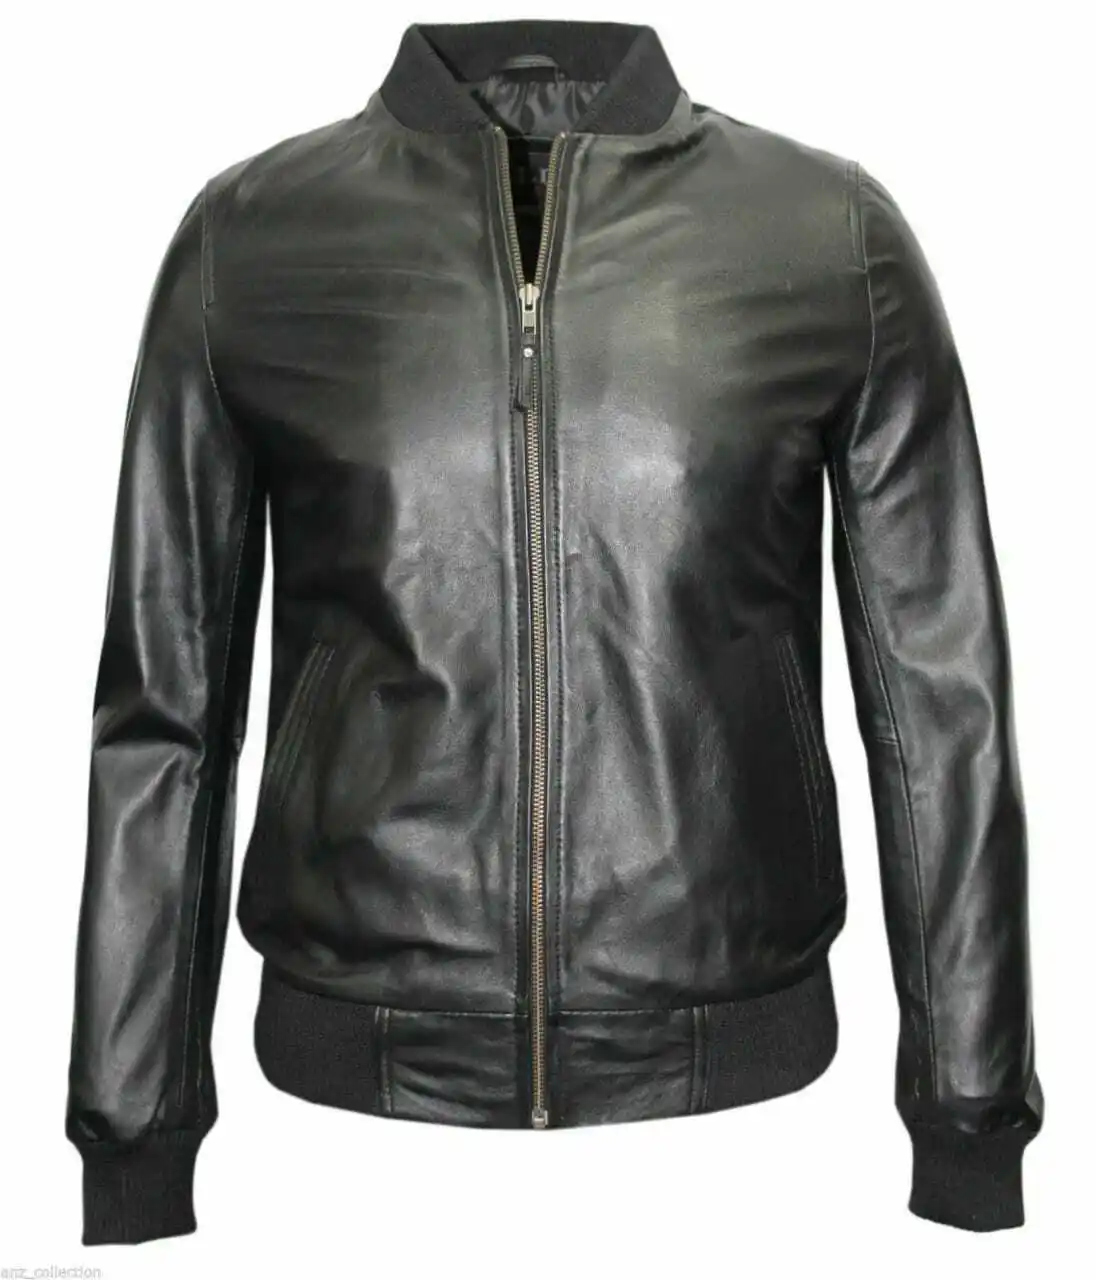 2021 New Arrival Men Leather Jacket Bomber Style Bike Rider Black Leather With Wholesale Price